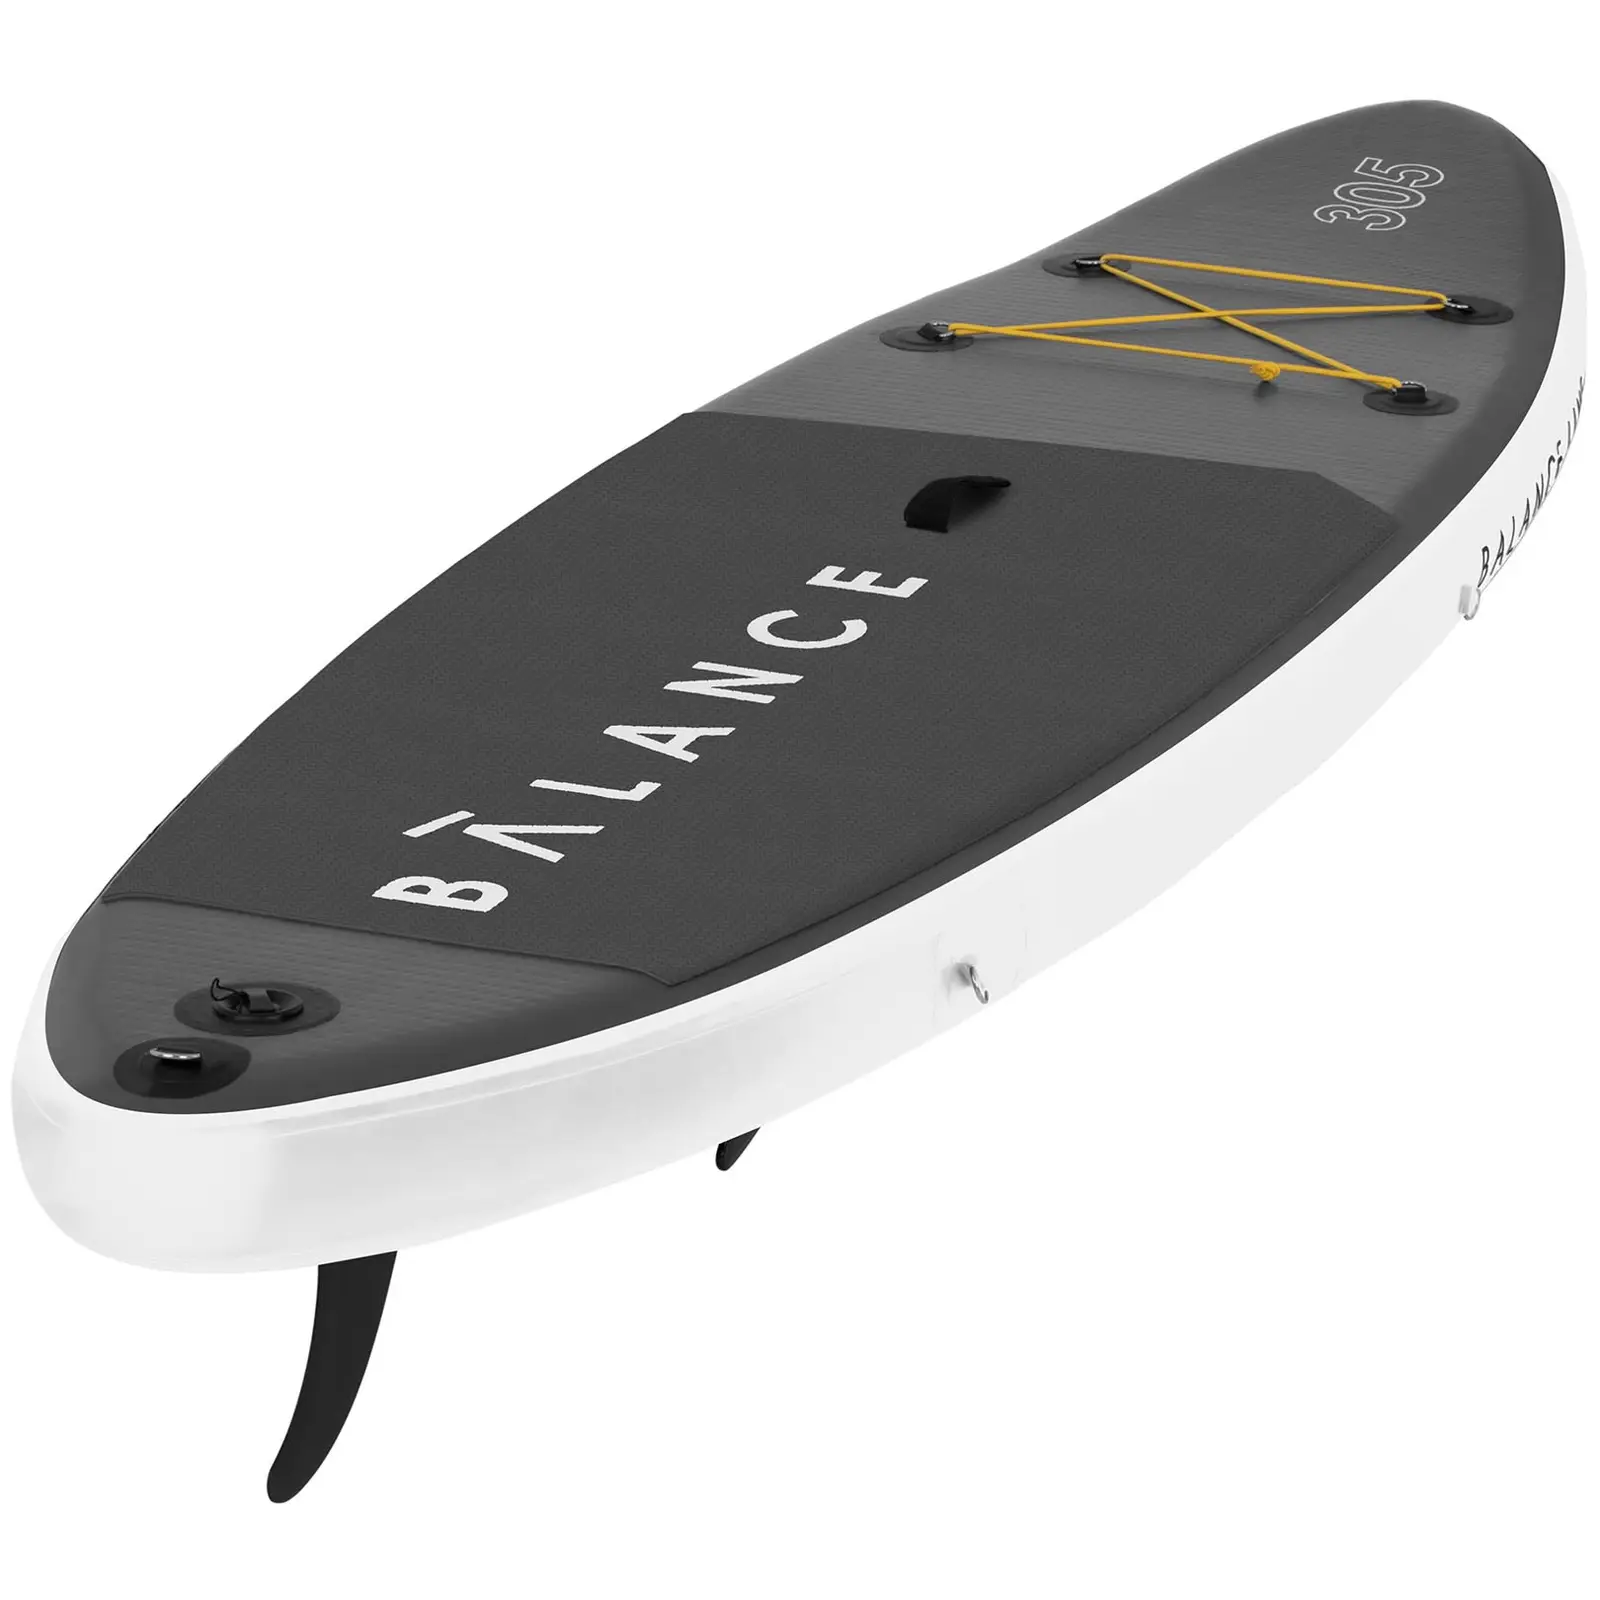 Stand up paddle gonflable - 135 kg - 305 x 79 x 15 cm